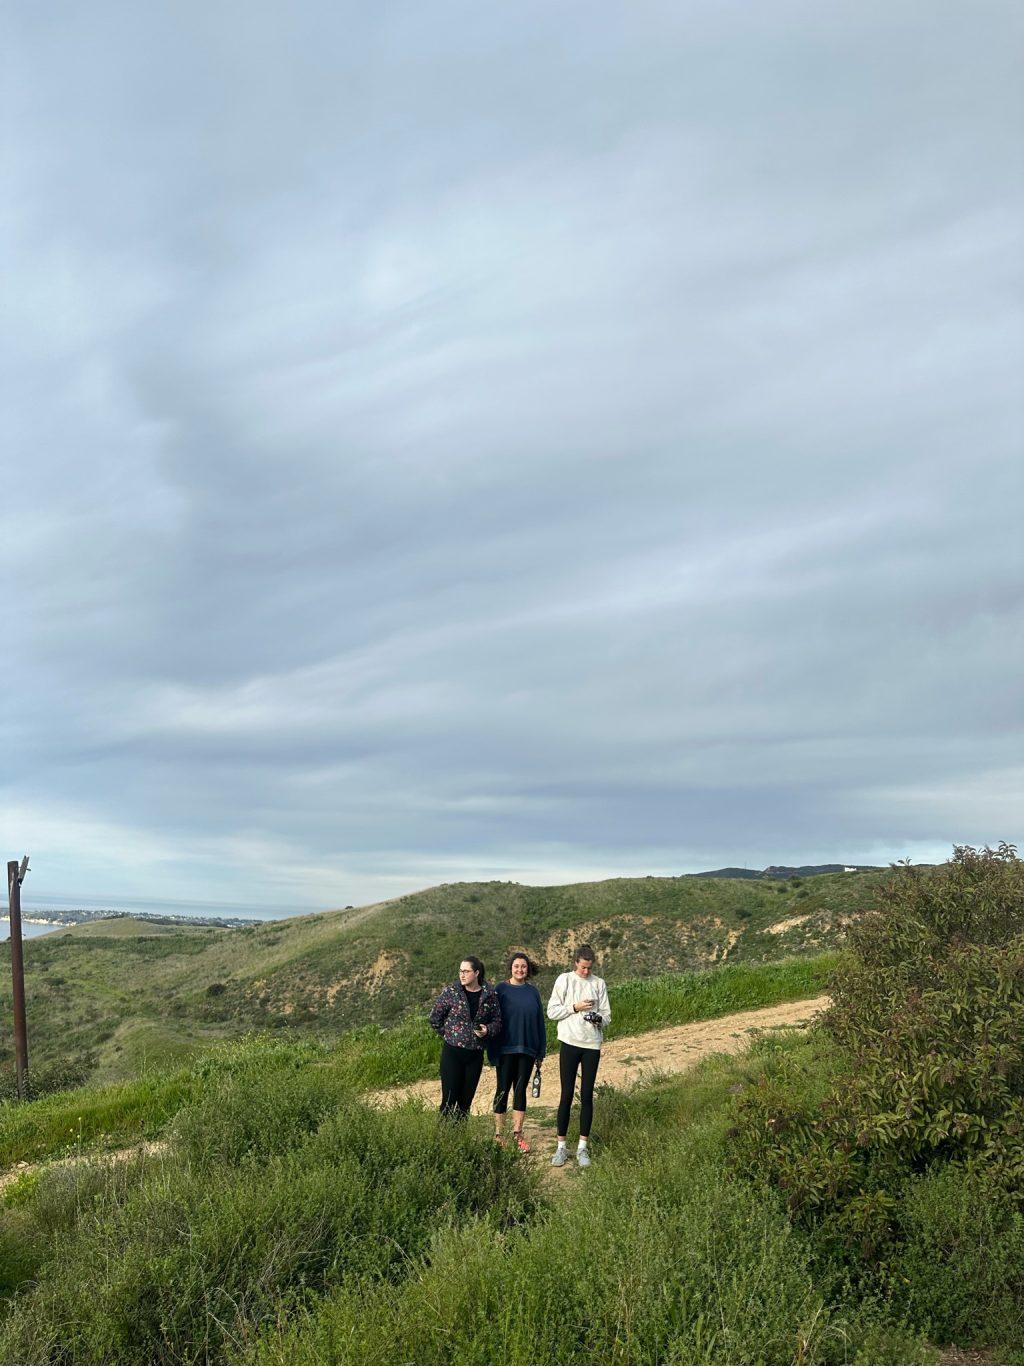 Hawkins (left), former Creative Director Haley Hoidal ('23) (right) and I (middle) hiking through Malibu in February. We decided to hike on a whim, but the pictures from that day were absolutely beautiful.